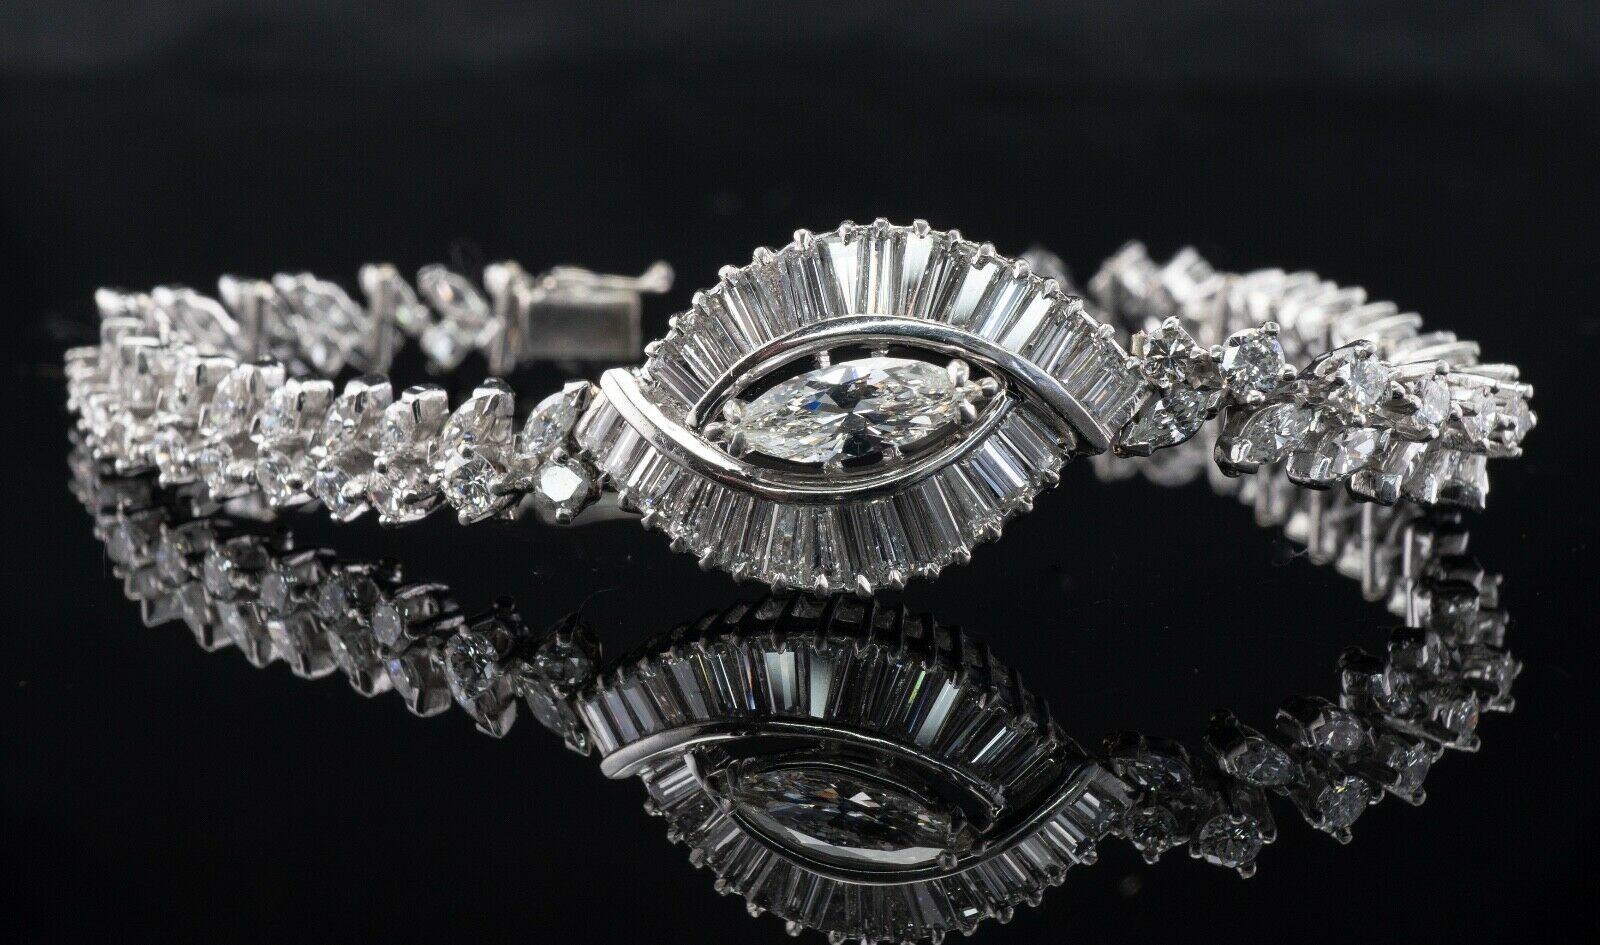 This gorgeous vintage bracelet is crafted in Platinum and 14K White Gold for the clasp.
The center piece holds one marquise cut diamond = .85 carat. This is a SI-1 clarity and G color stone.
The center diamond is surrounded with 32 baguettes = 1.60